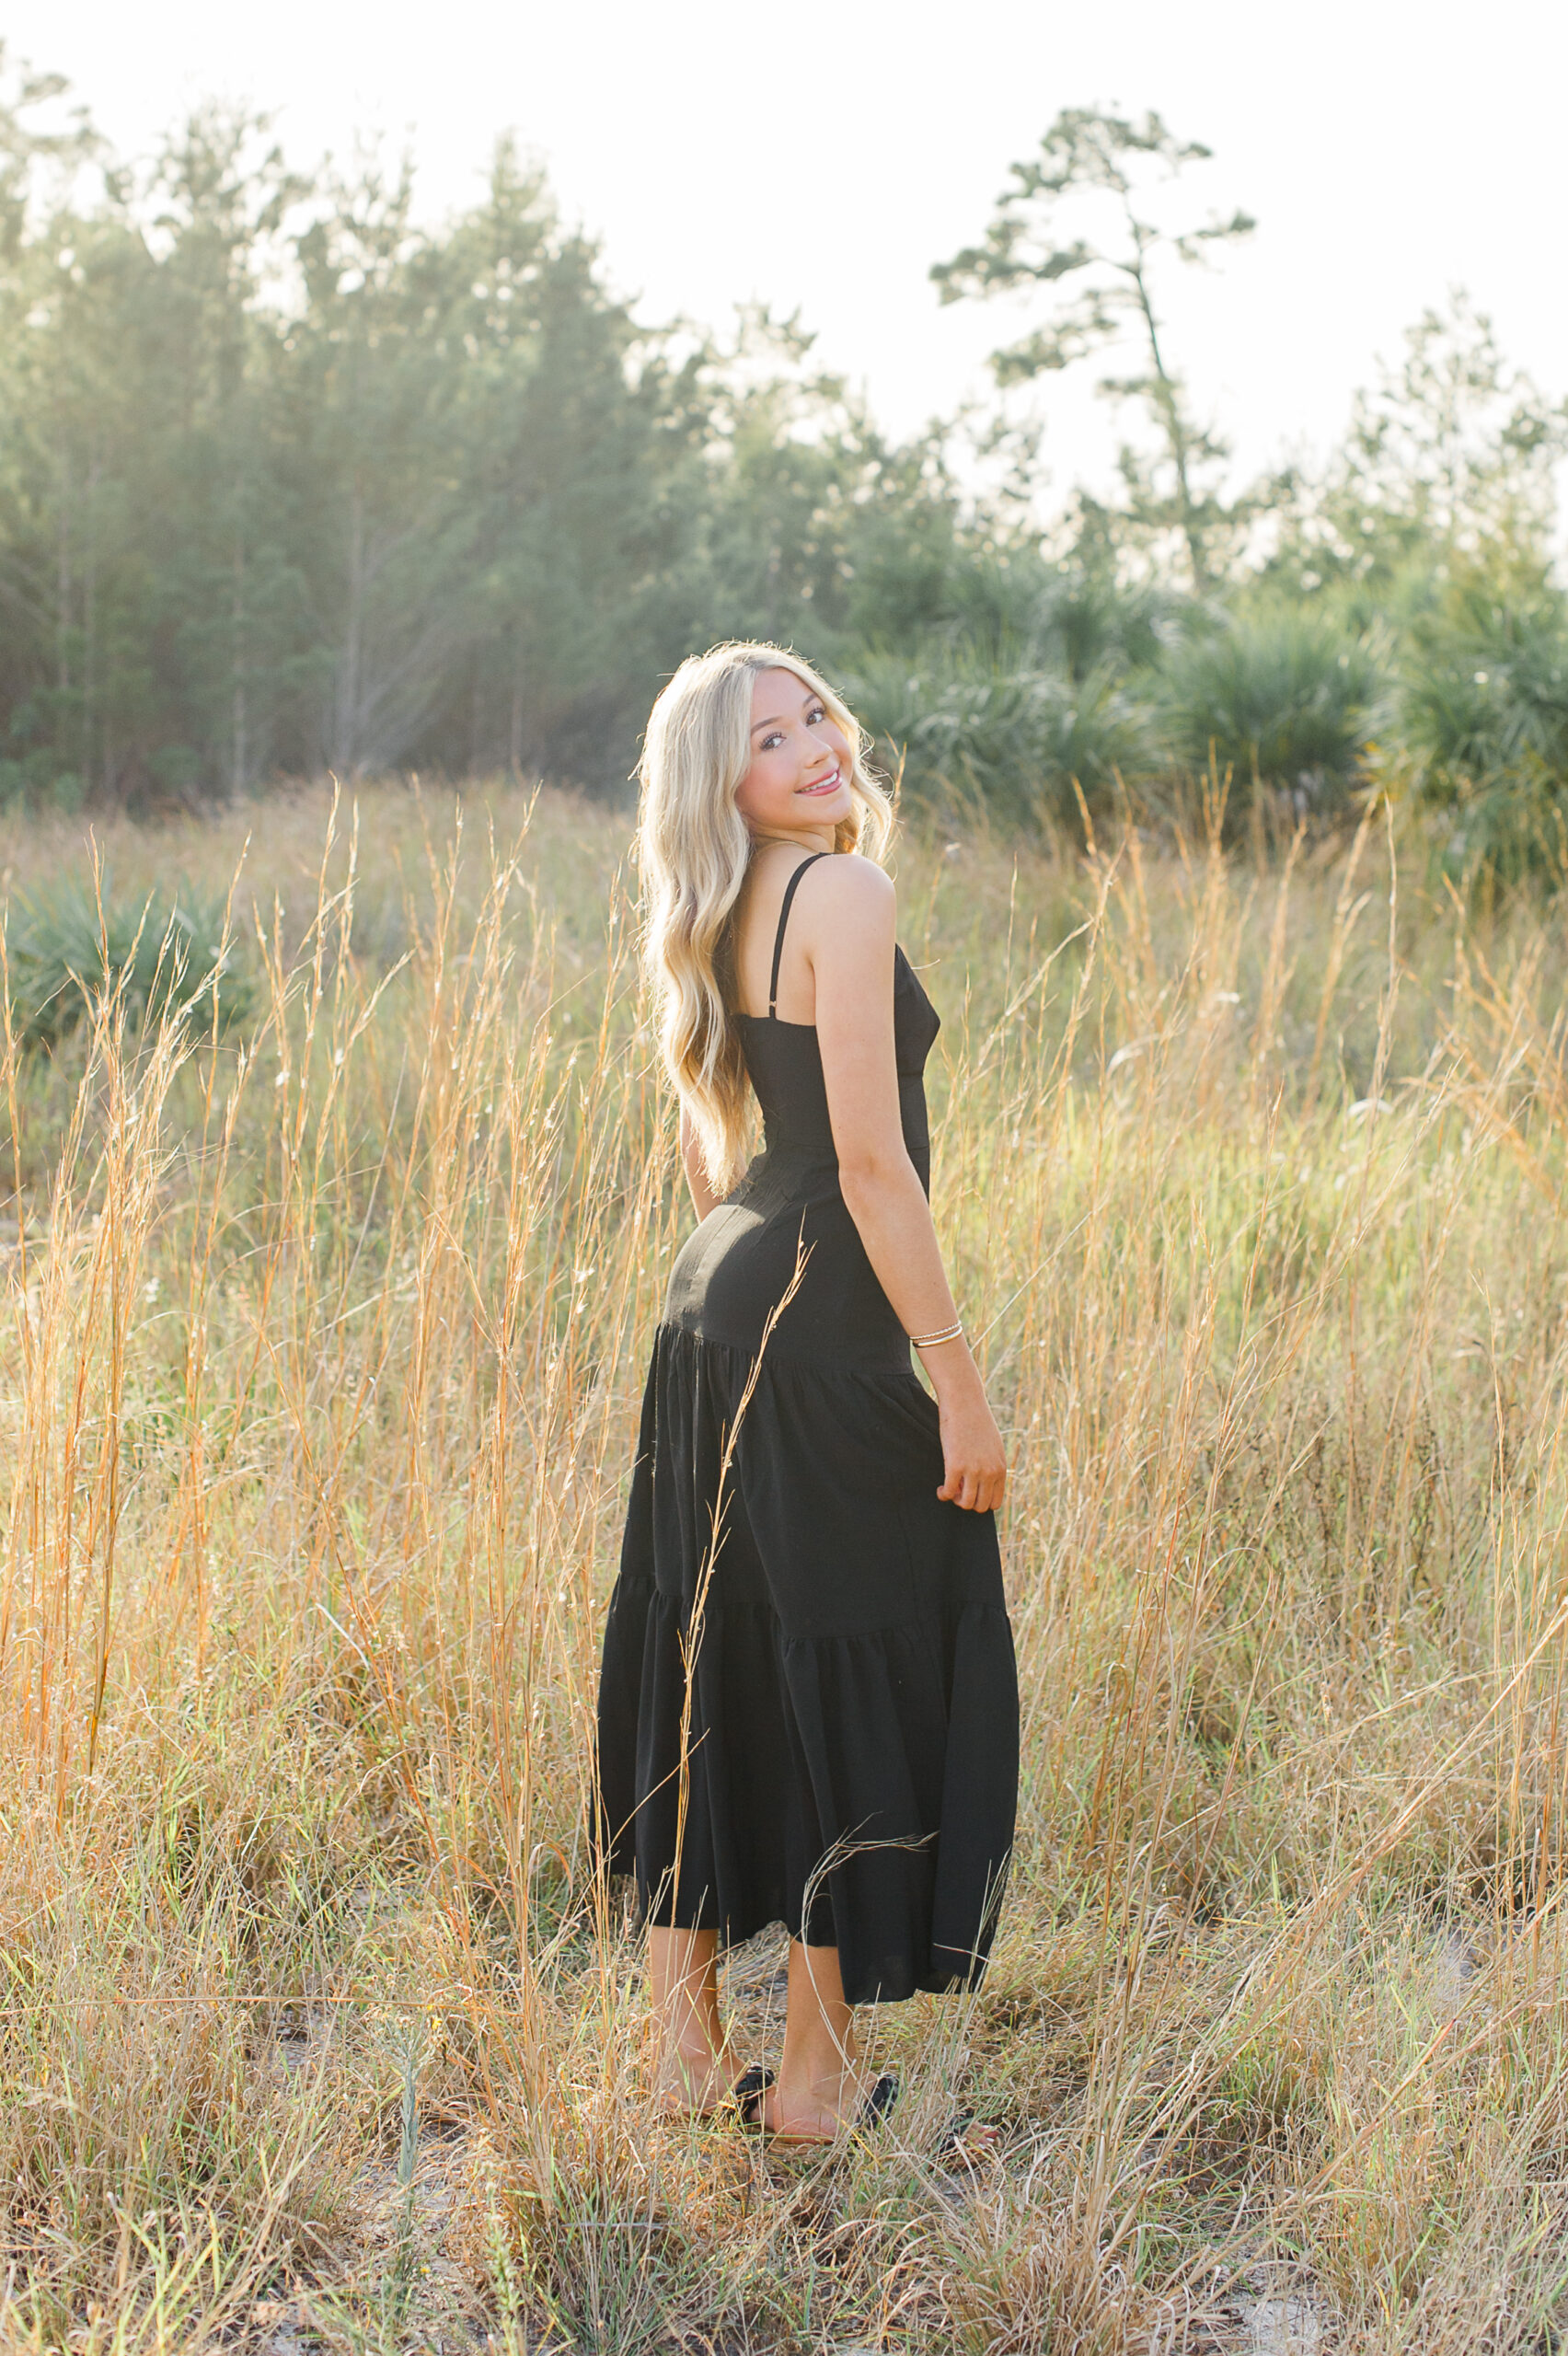 Timber Creek High School senior walking in field of tall grass wearing a black dress during her senior photography session.